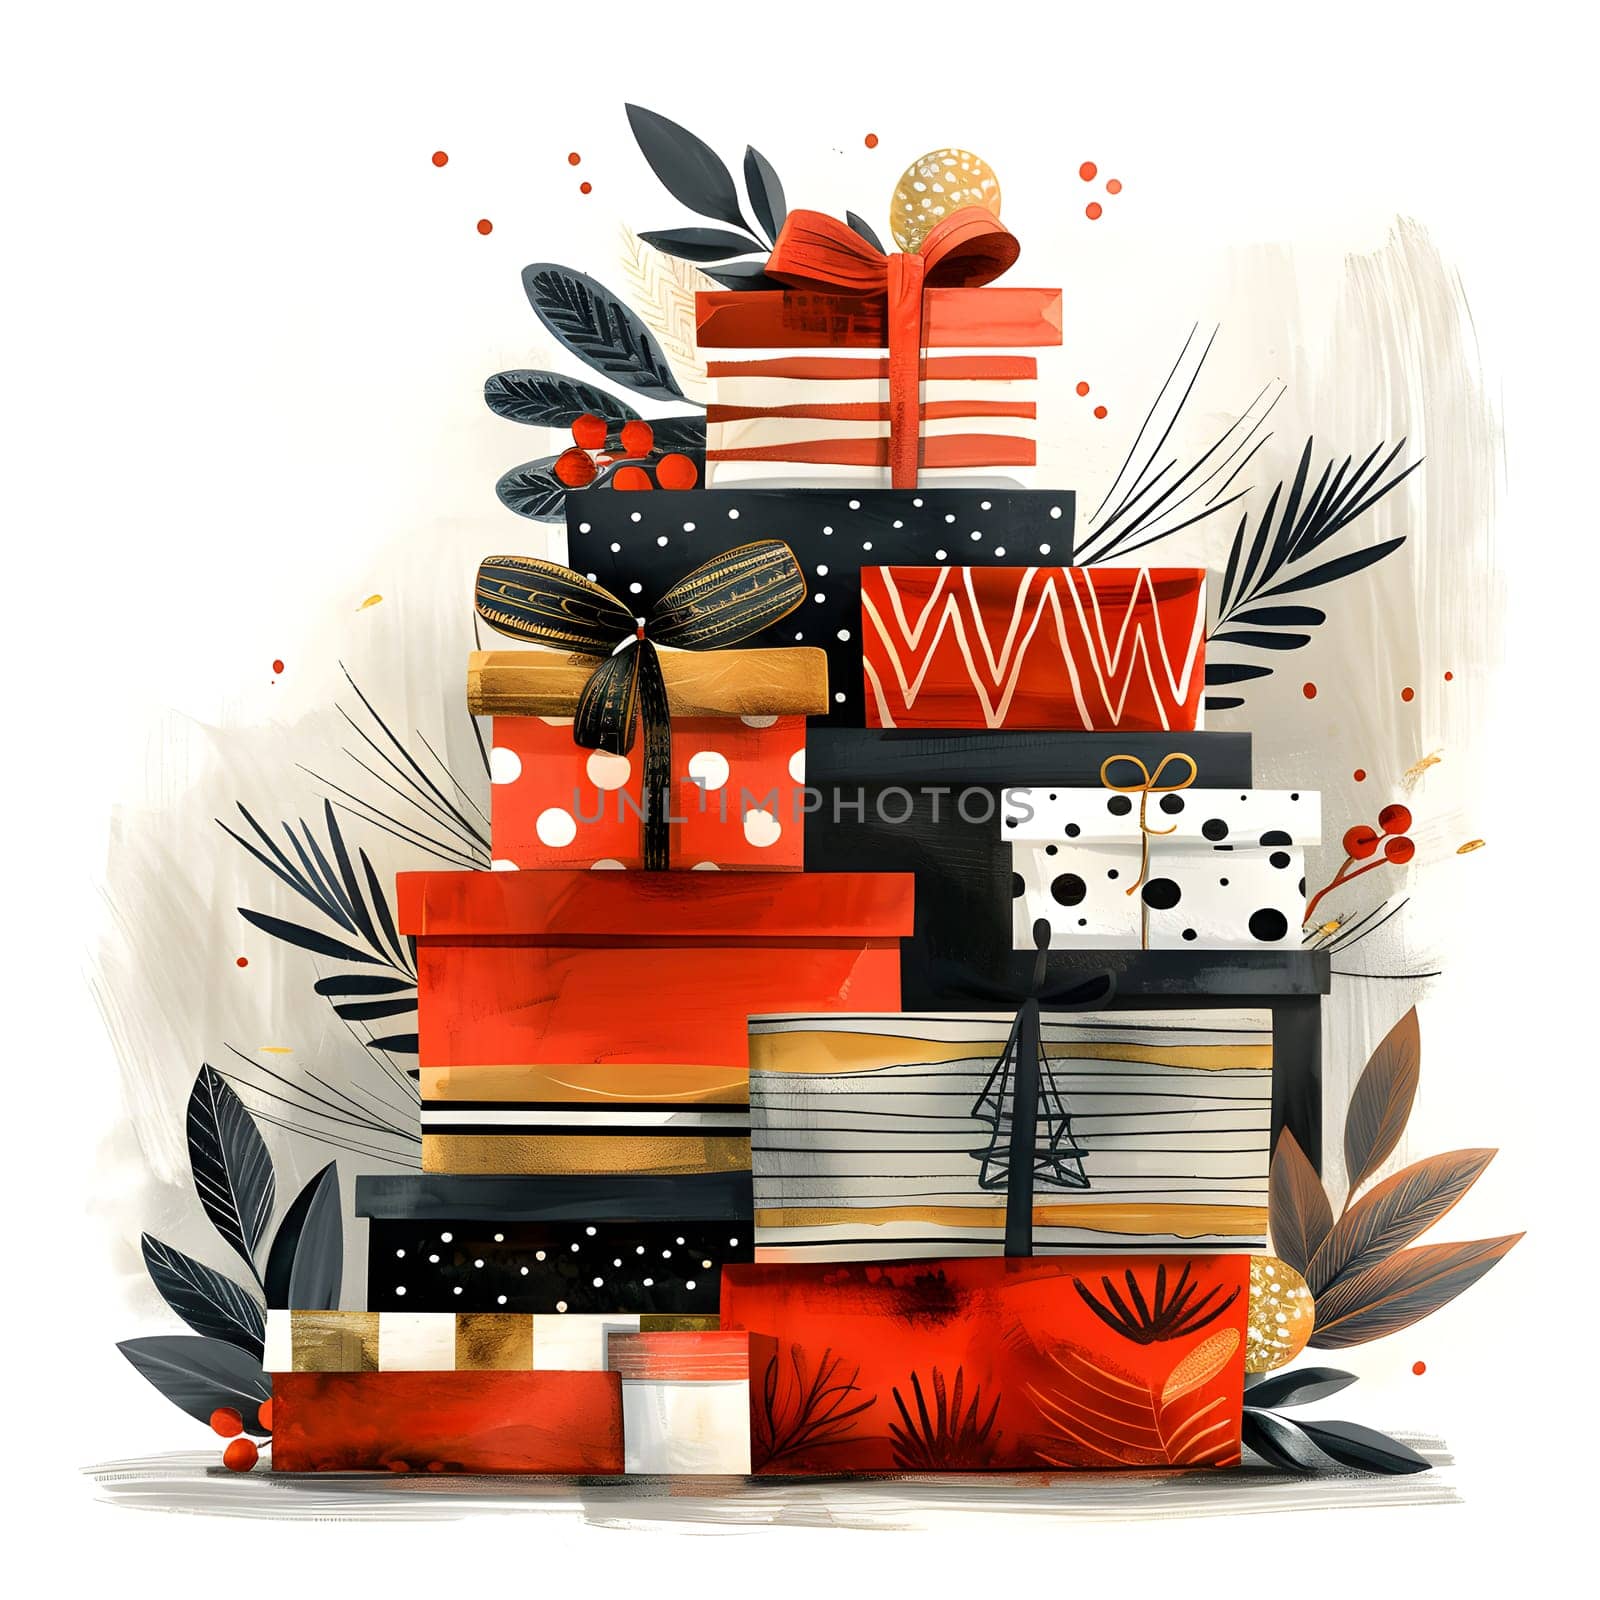 A rectangle of Christmas presents stacked on top of each other creates an artful display. Orange paper wraps each gift, nestled under a tree made of wood and adorned with twig decorations